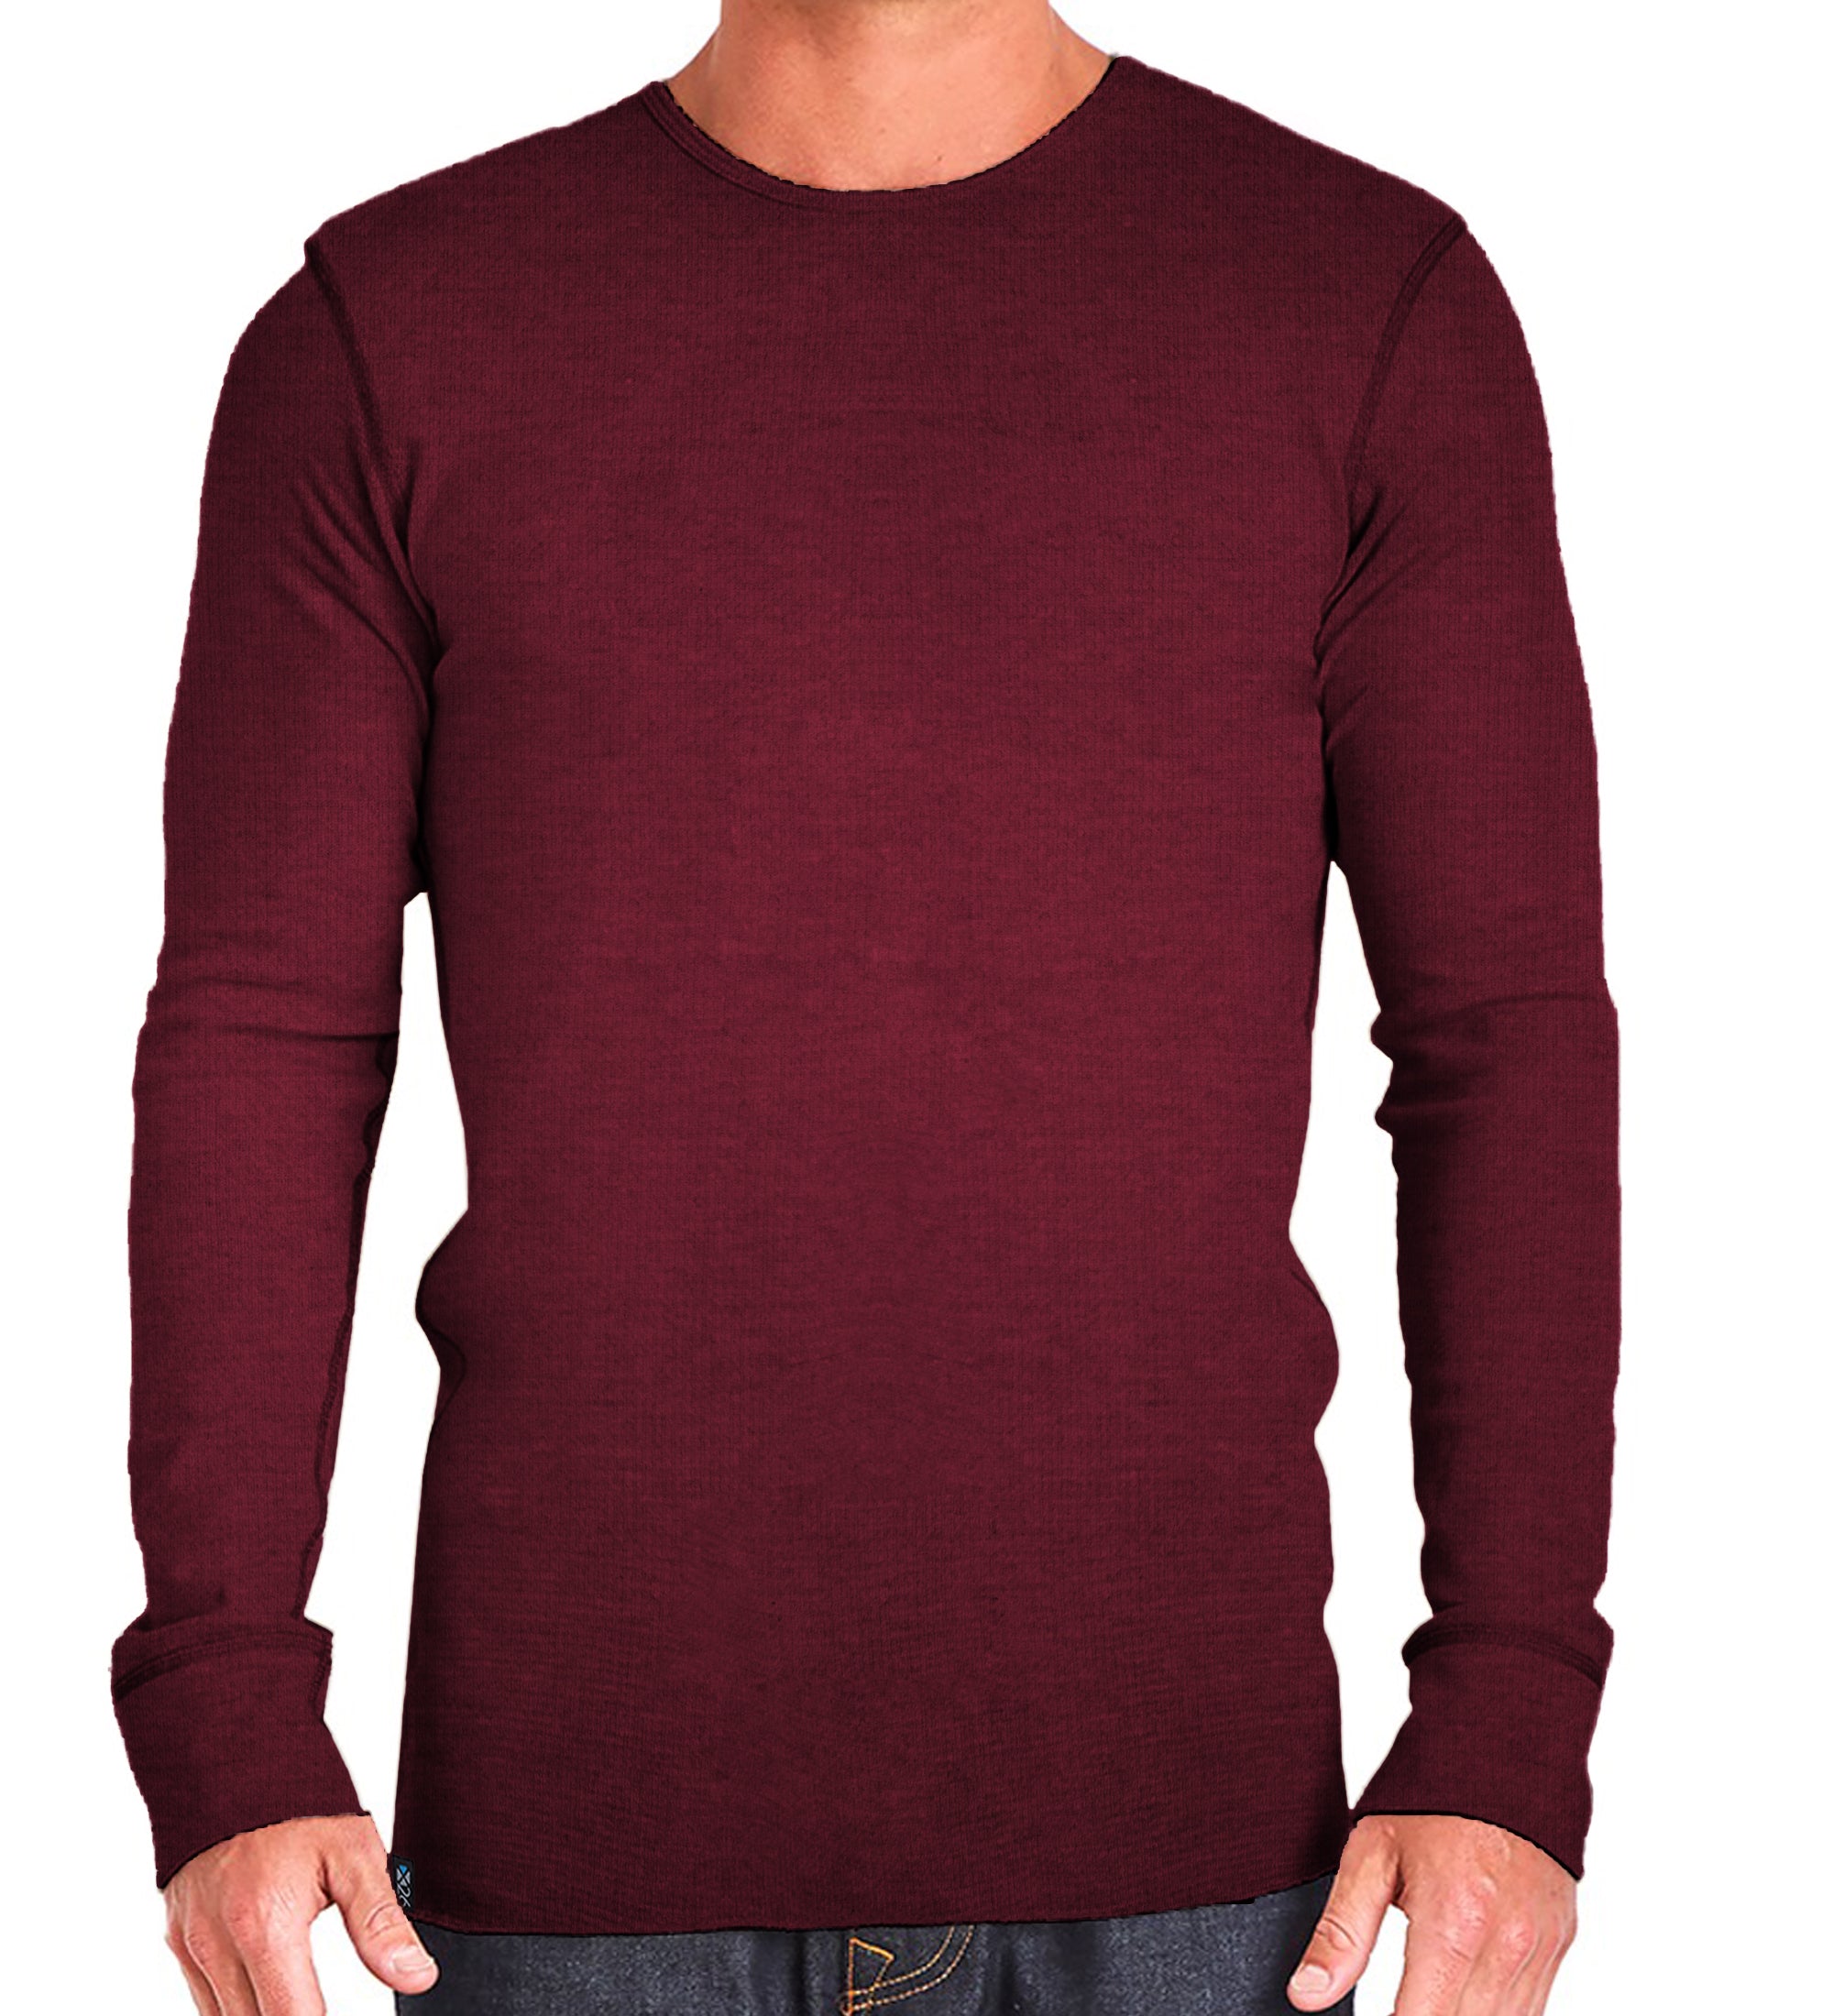 Thermal Waffle Knit Crew Neck Long Sleeve T-Shirt – Exit 26 Apparel